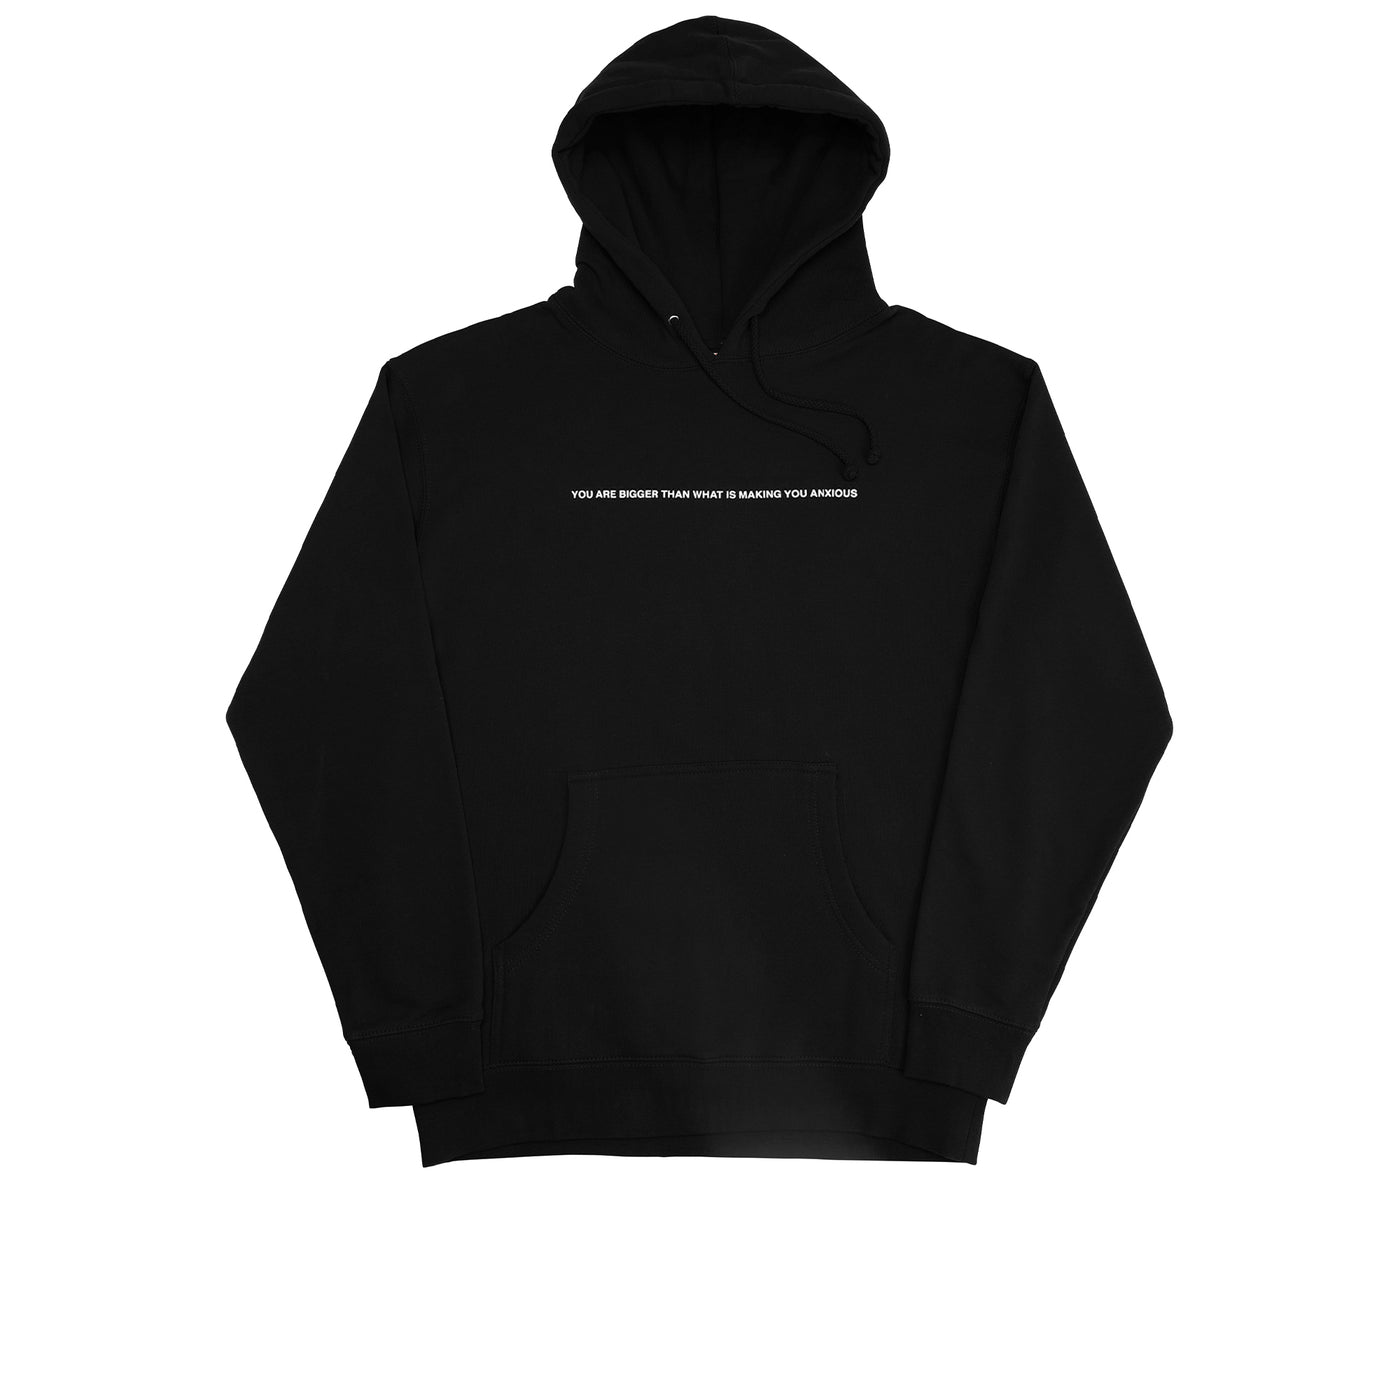 We're Not Really Strangers front zoomed out view of the black hoodie in a flat lay